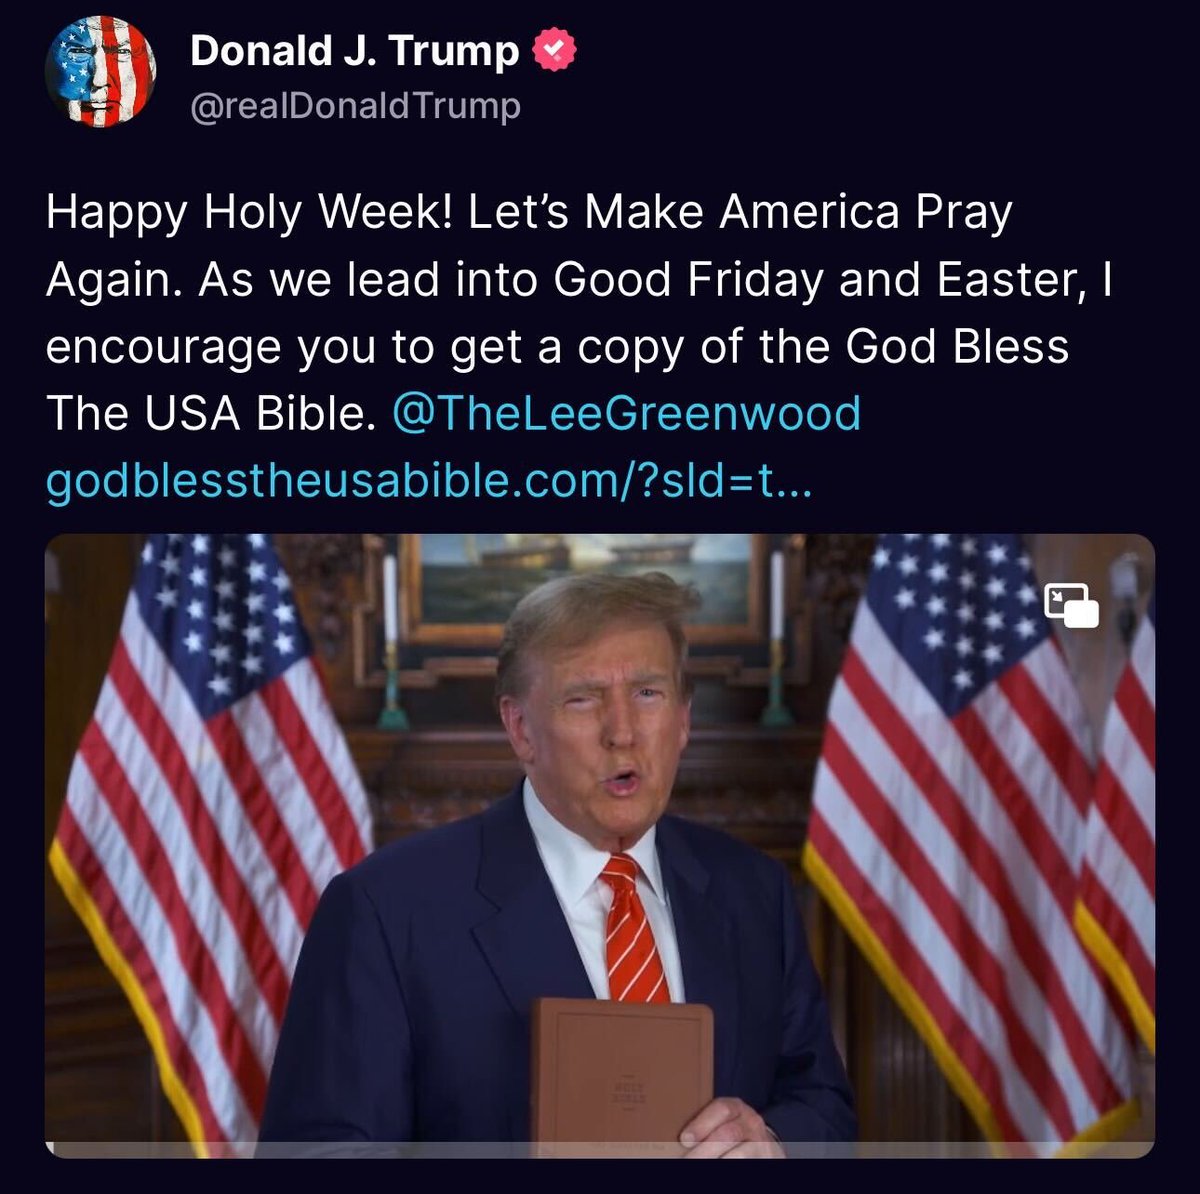 The Chosen One Donald Trump Bible Thou shall Lie, Thou shall steal, commit Adultery, Fraud, Treason, pedophile, rapist, indicted 4 times and has 91 felonies, cheats on his taxes, golf, Bangs porn stars, sells off classified documents etc...